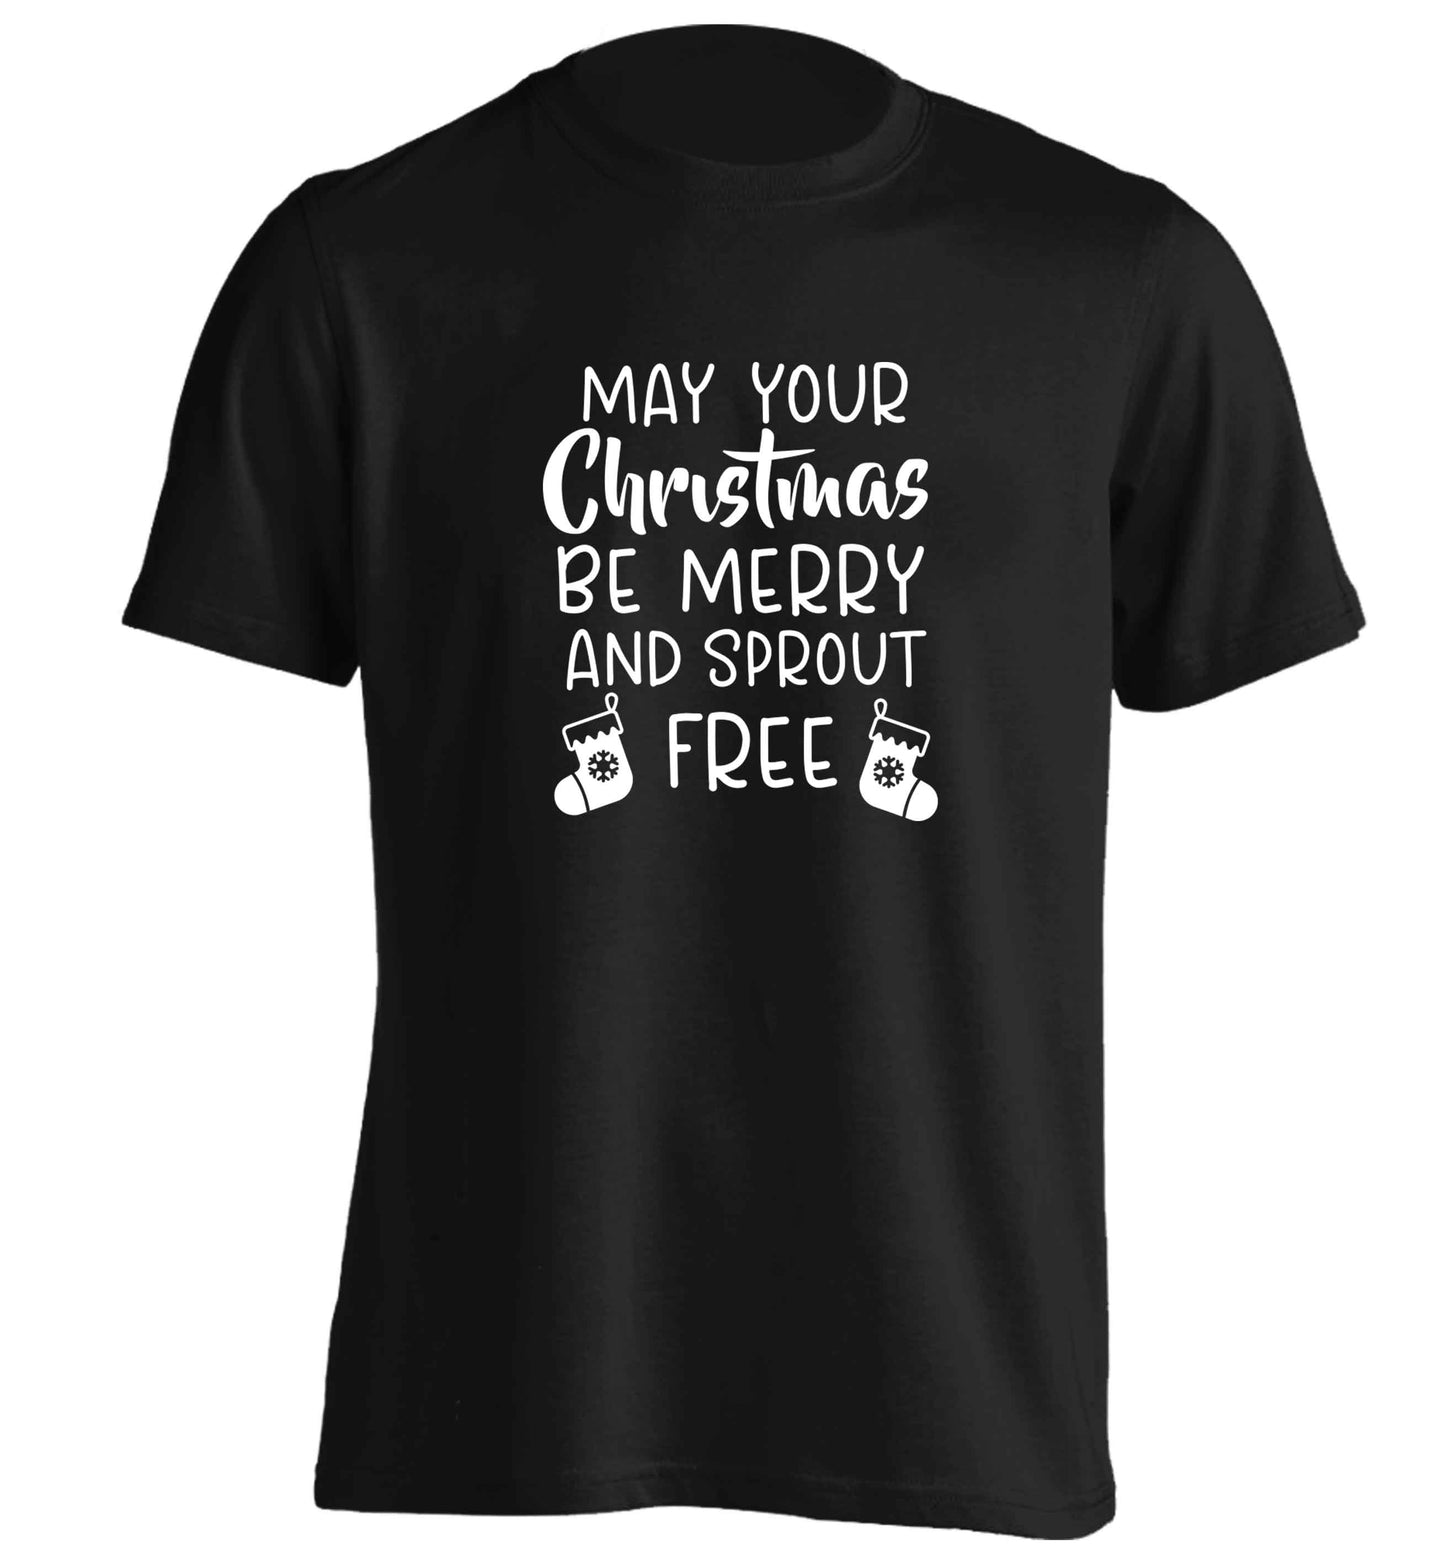 May your Christmas be merry and sprout free adults unisex black Tshirt 2XL